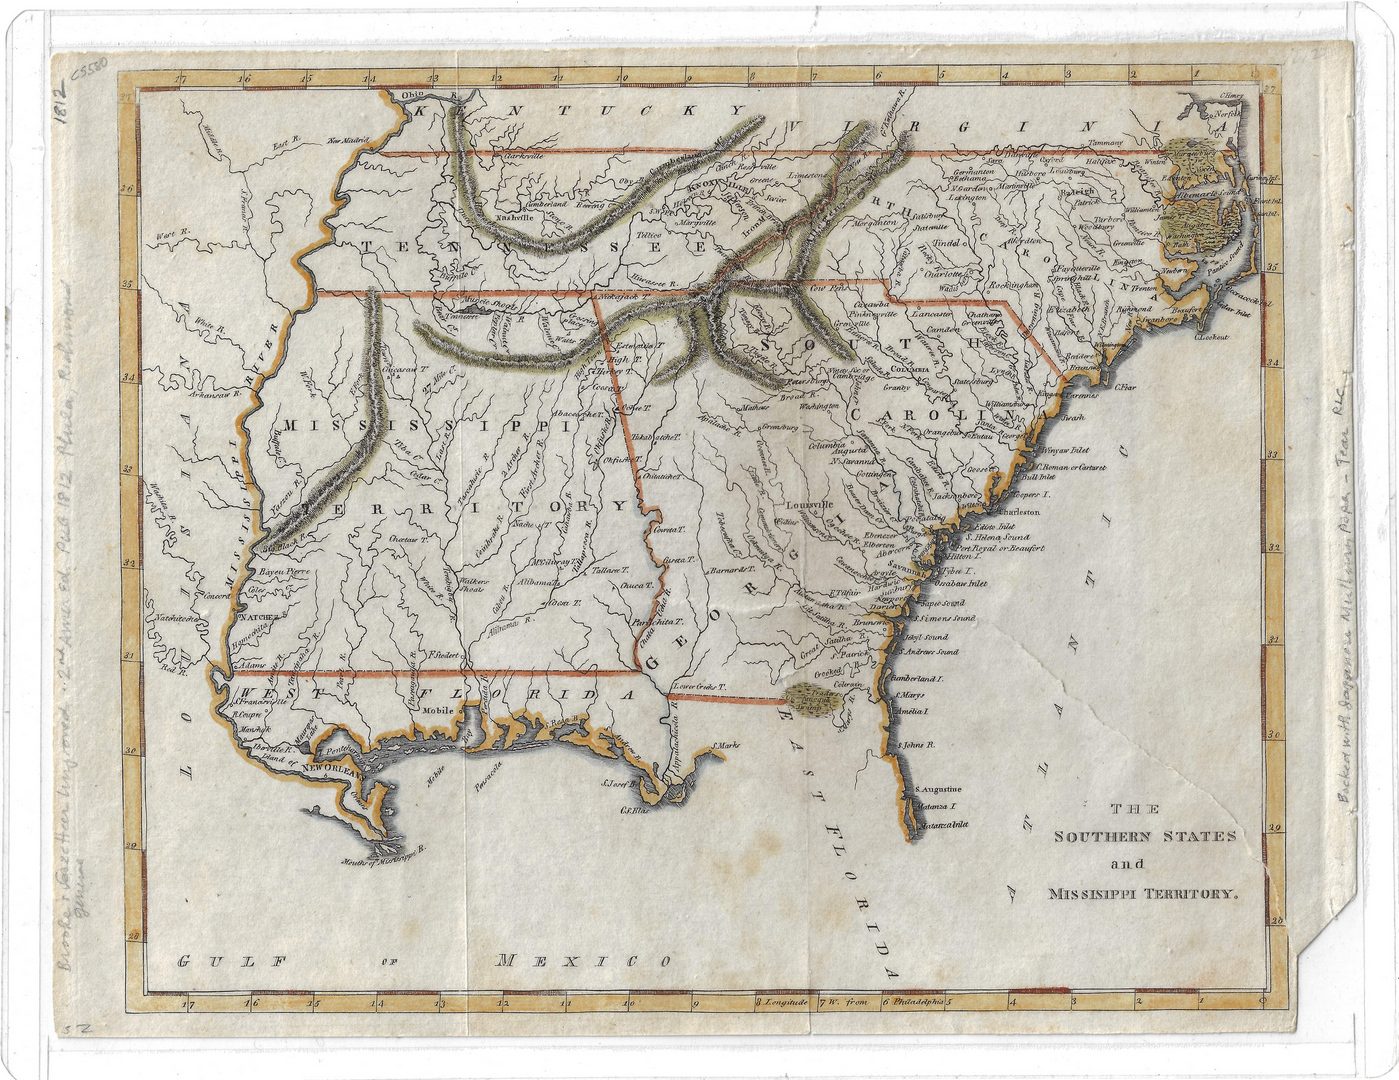 Lot 296: Cary and Warner Map: Southern States and Mississippi Territory